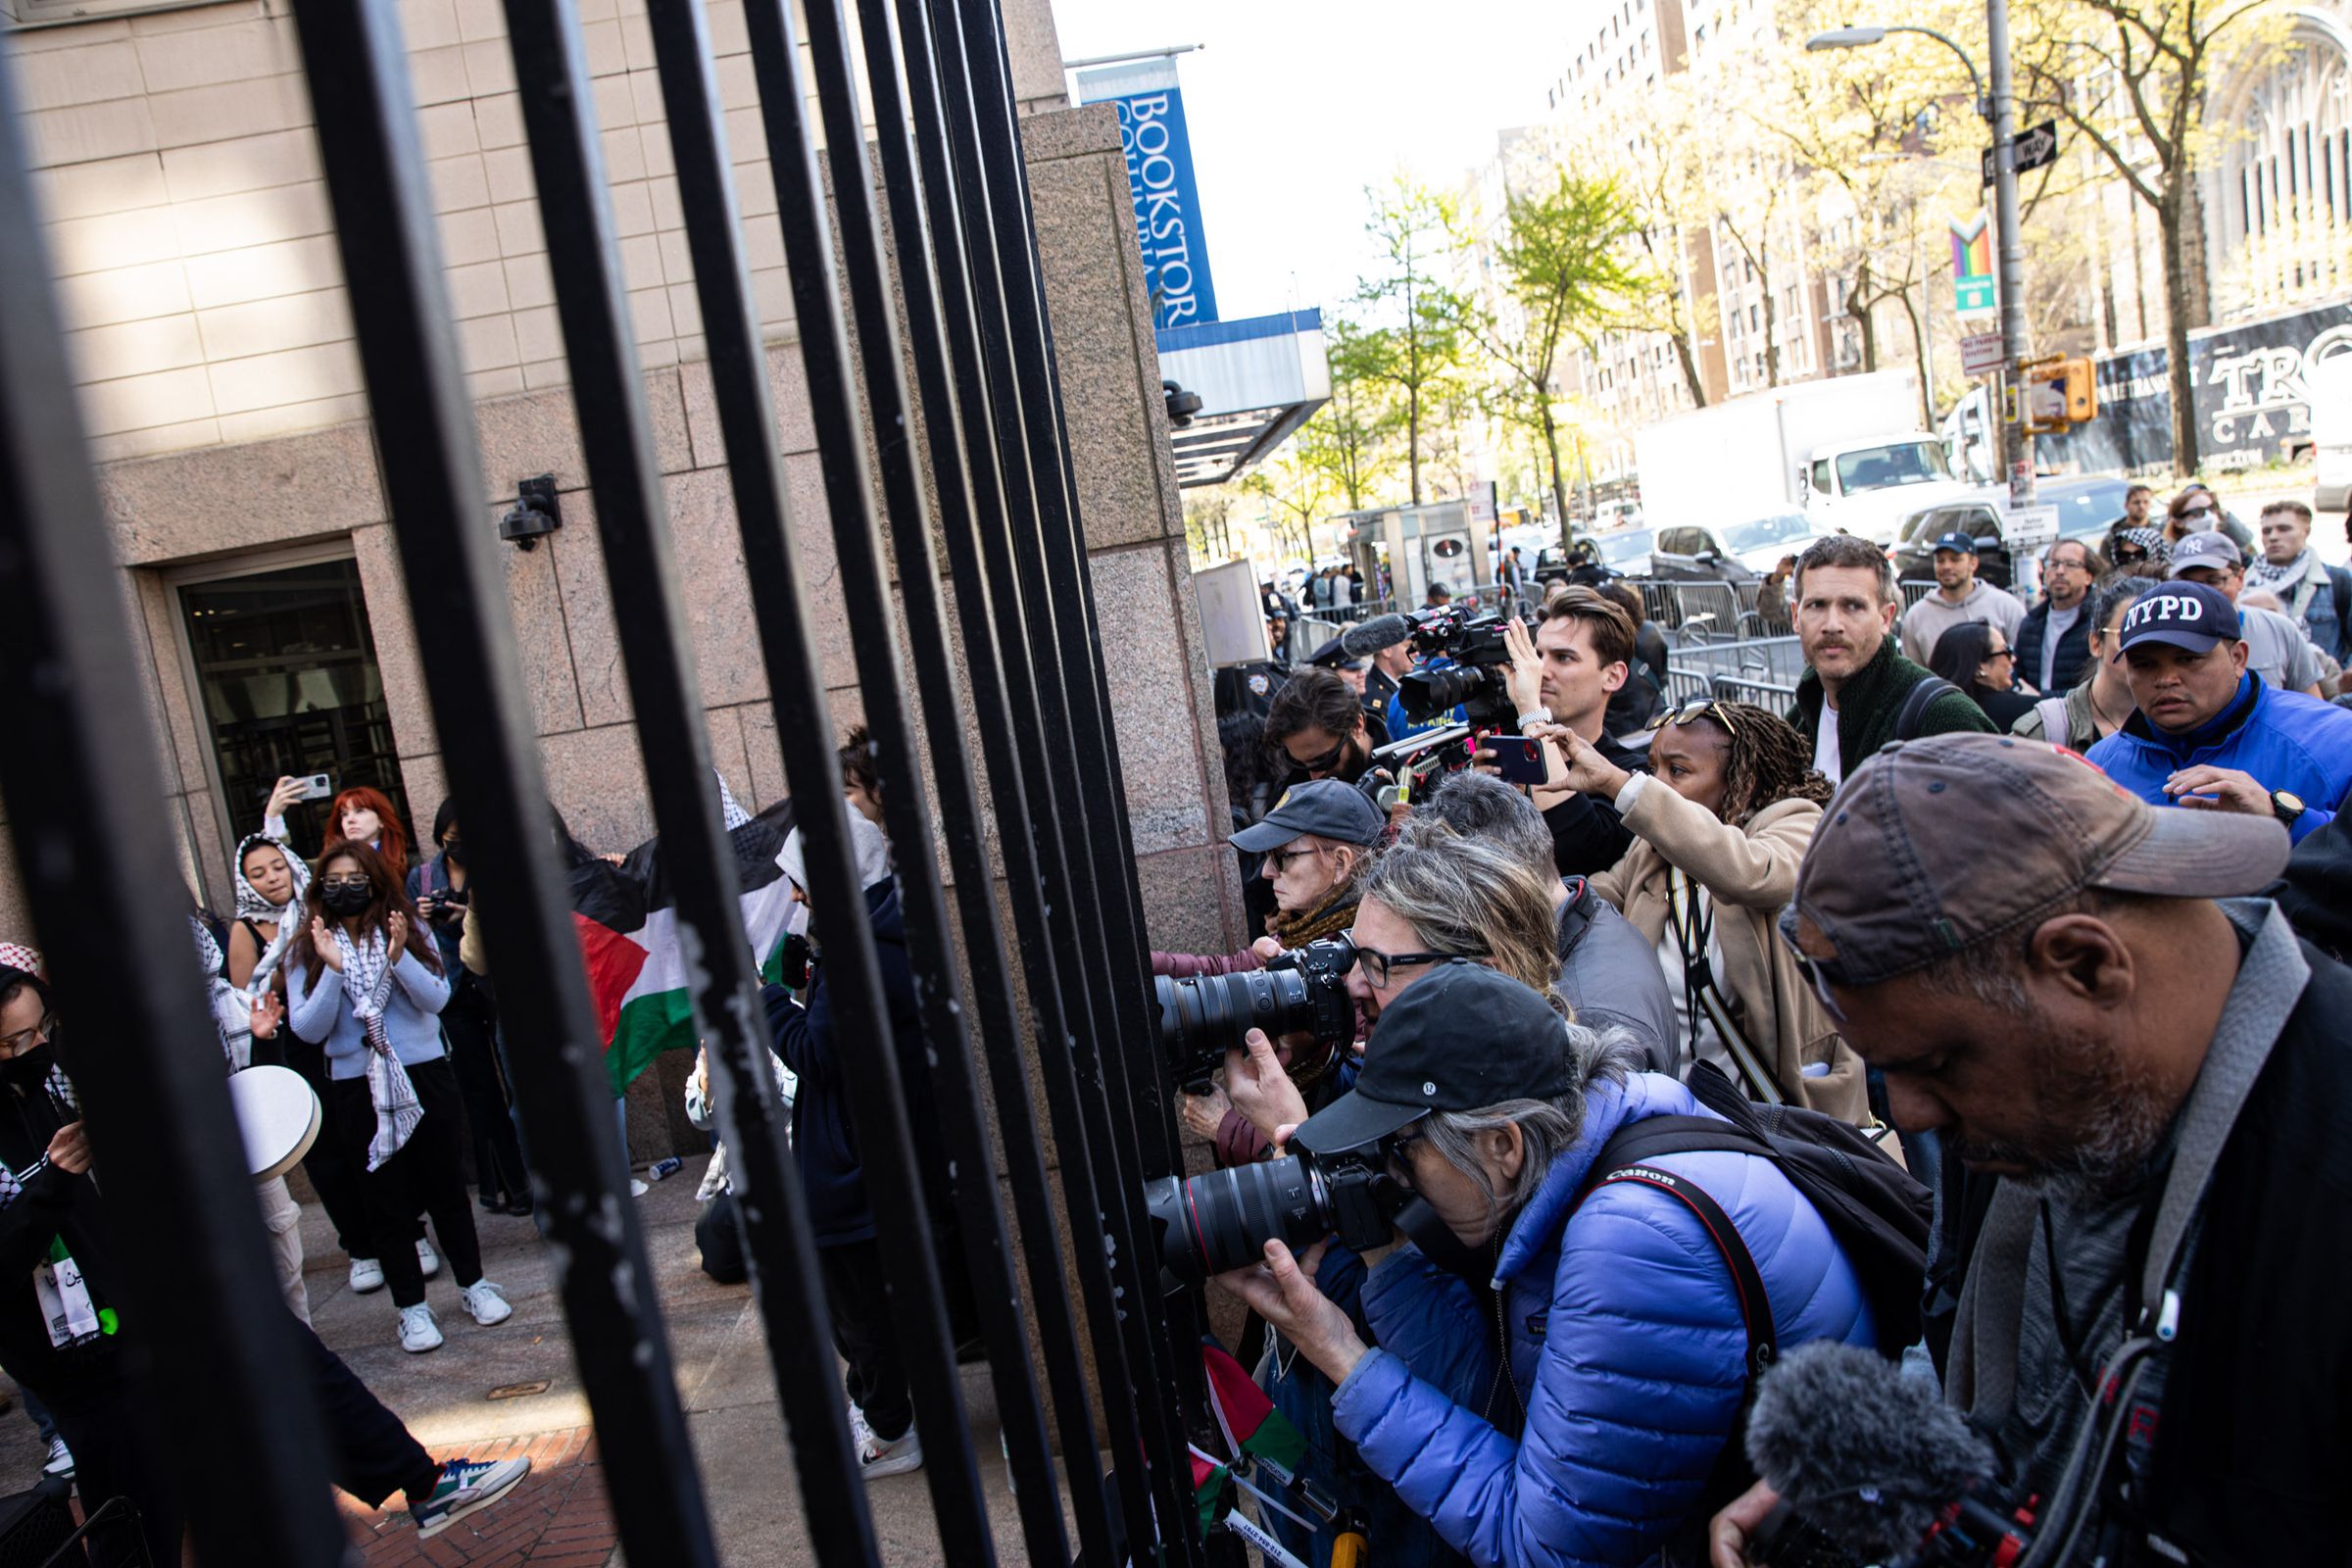 A crowd of photographers presses in at the wrought-iron gates of the university. Behind the fence, students demonstrate wearing kaffiyehs and waving Palestinian flags.